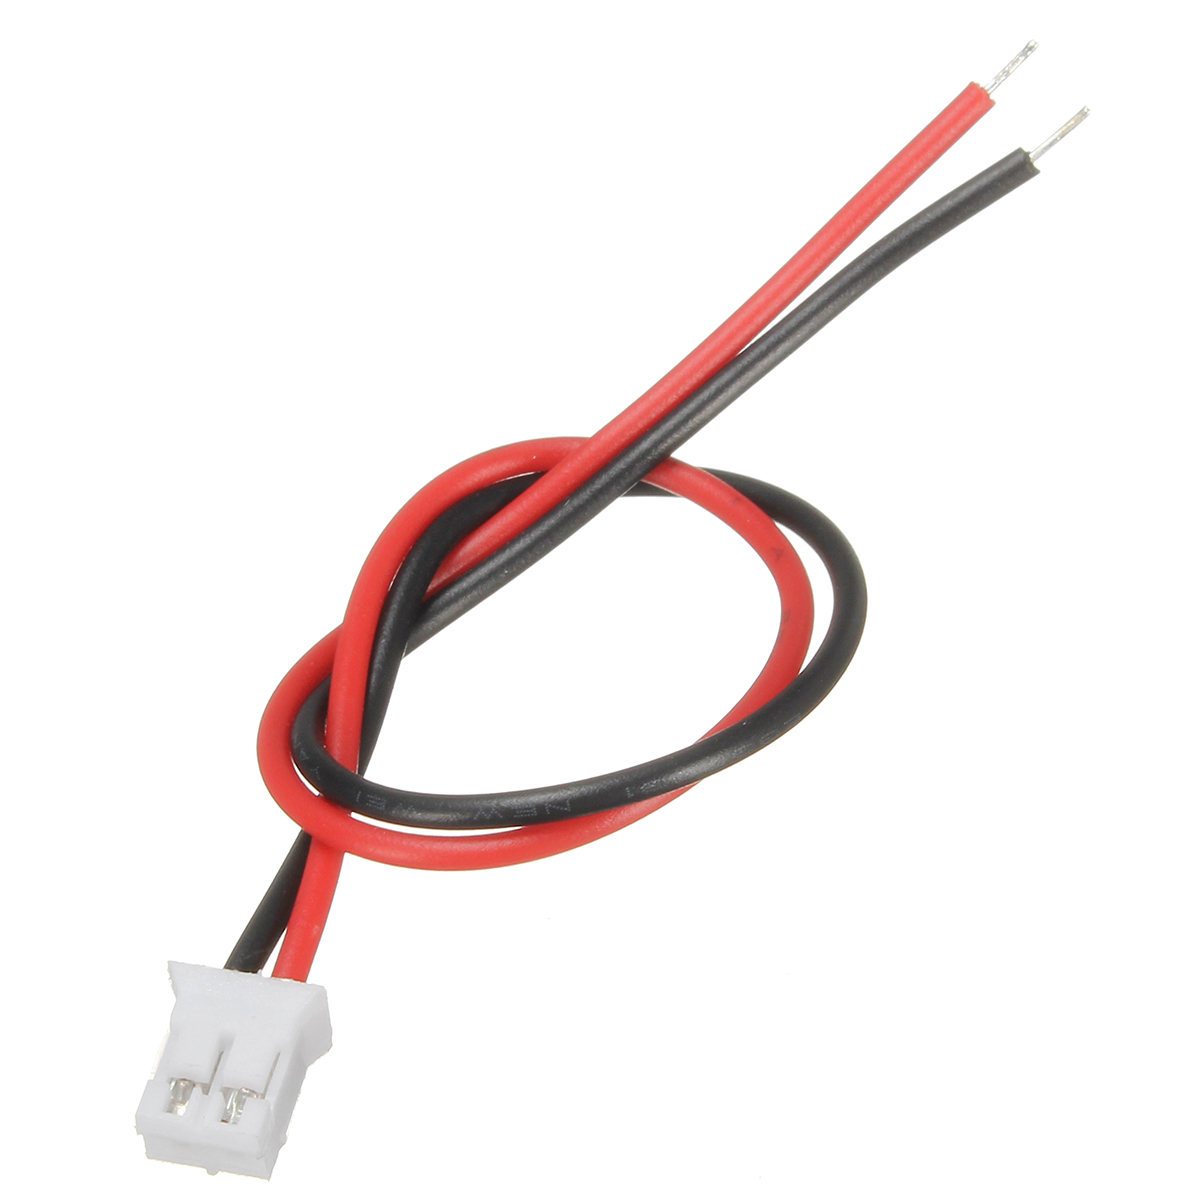 Excellwayreg-100Pcs-Mini-Micro-JST-20-PH-2Pin-Connector-Plug-With-120mm-Wires-Cables-1147298-5